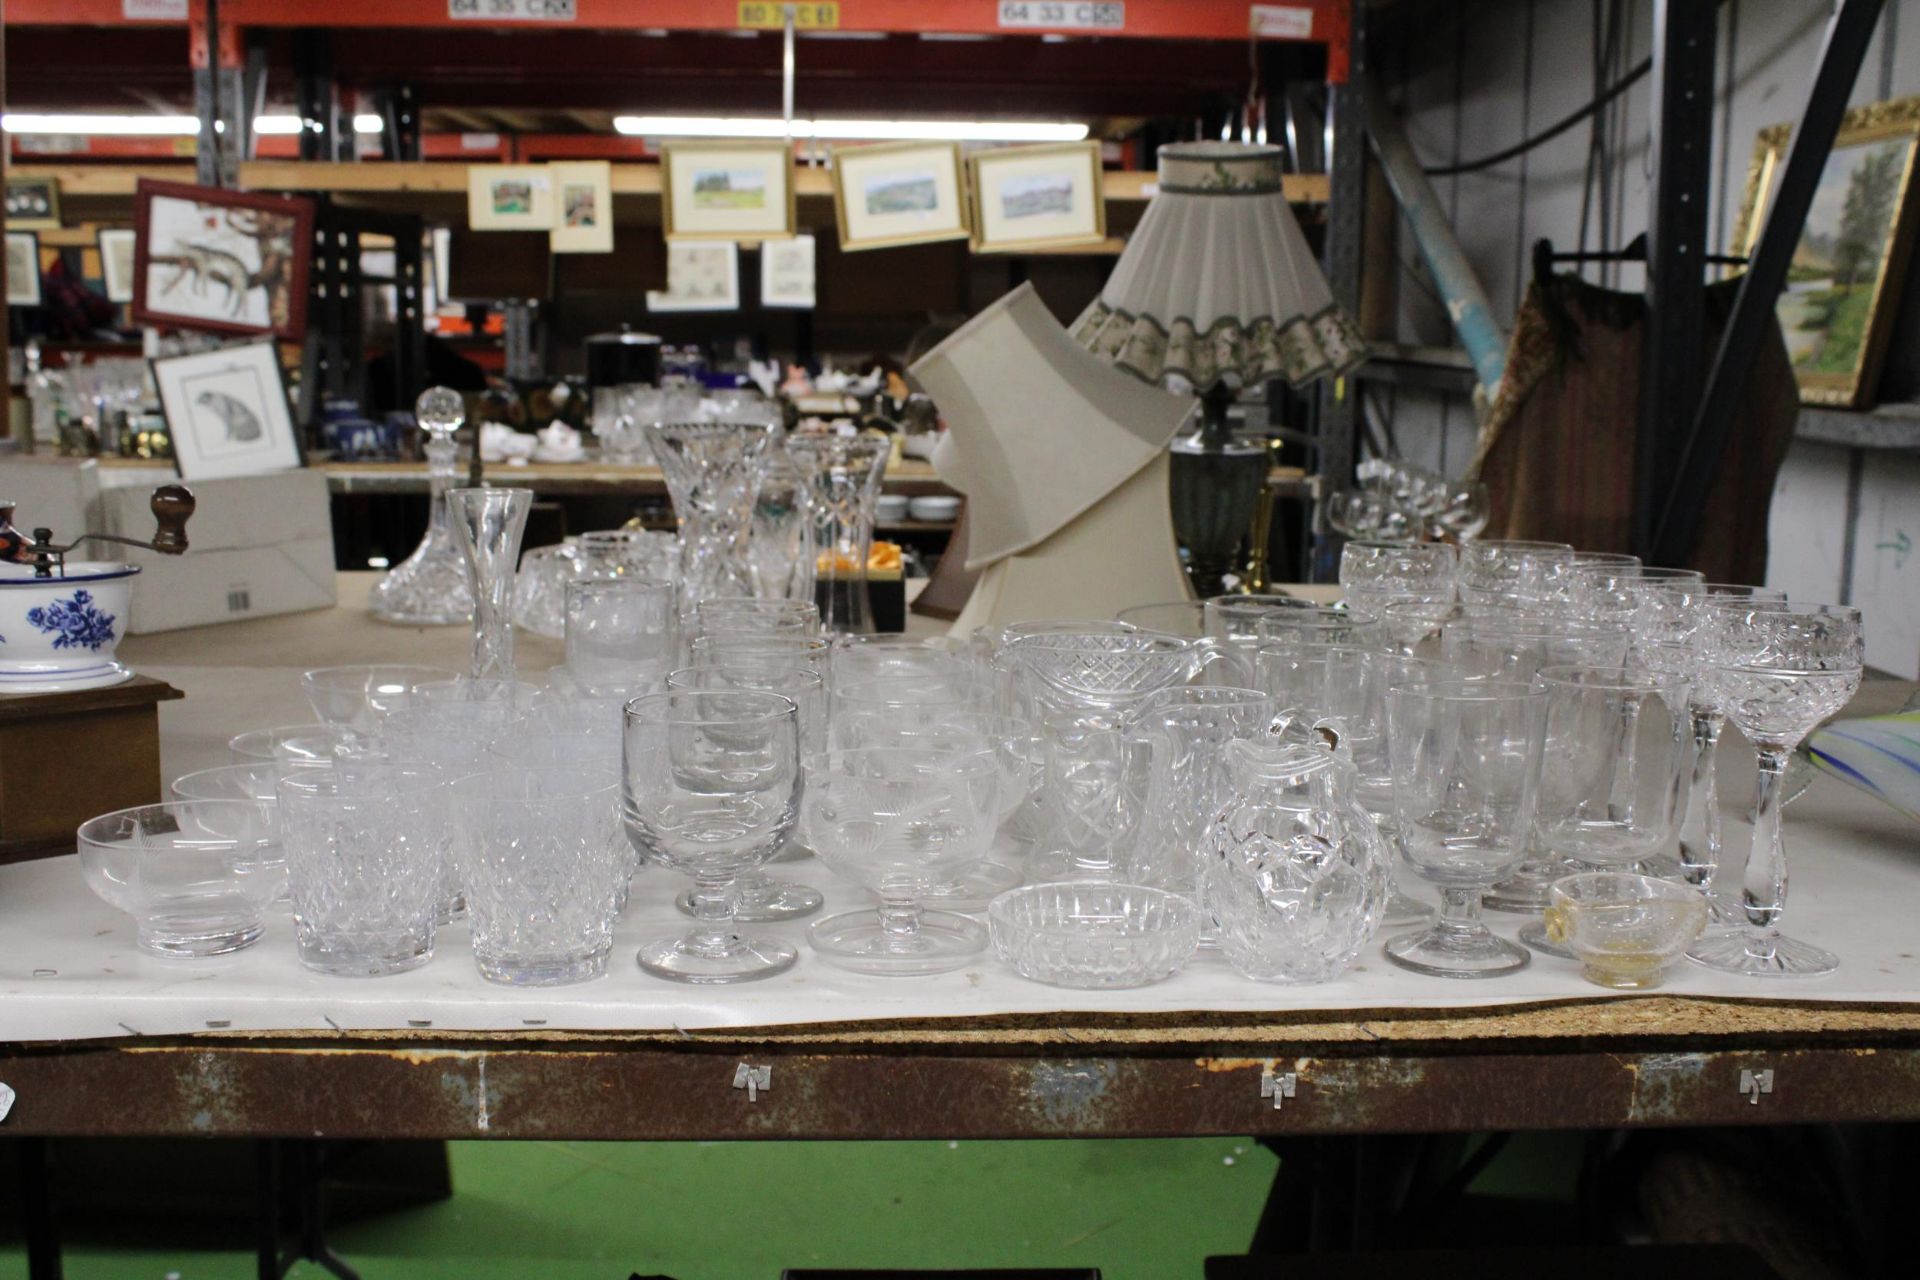 A LARGE COLLECTION OF GLASSWARE TO INCLUDE DESSERT DISHES, JUGS, WINE GLASSES ETC